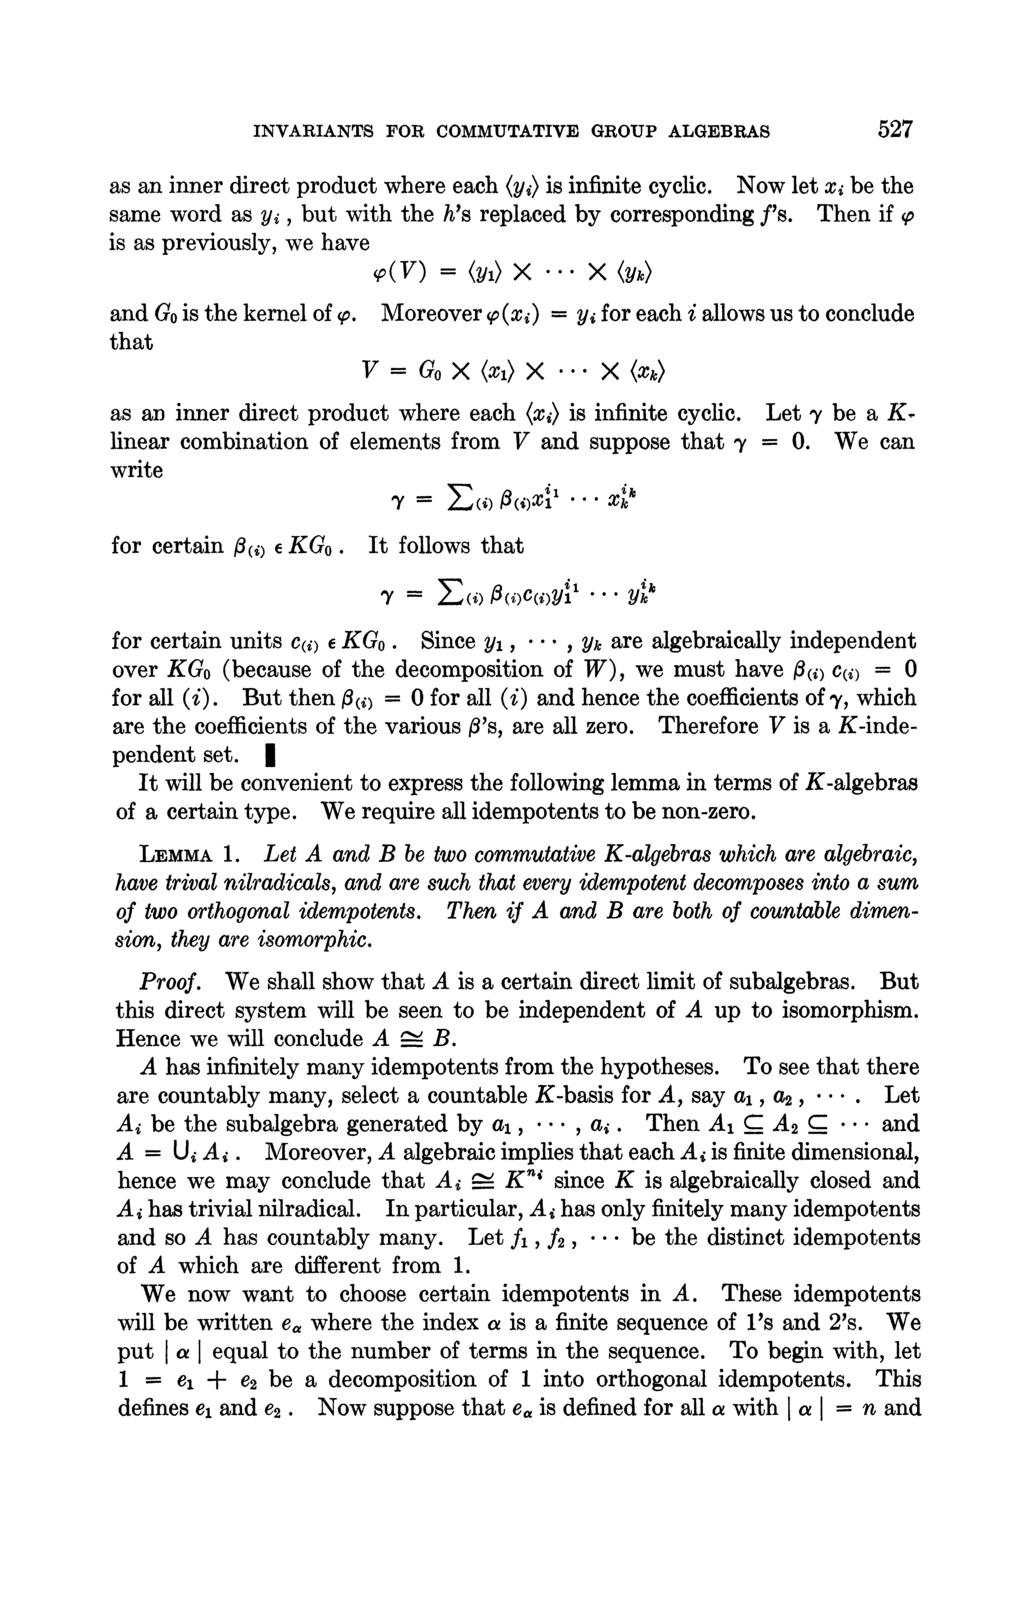 INVARIANTS FOR COMMUTATIVE GROUP ALGEBRAS 527 as an inner direct product where each (y) is infinite cyclic. Now let x be the same word as y, but with the h s replaced by corresponding f s.